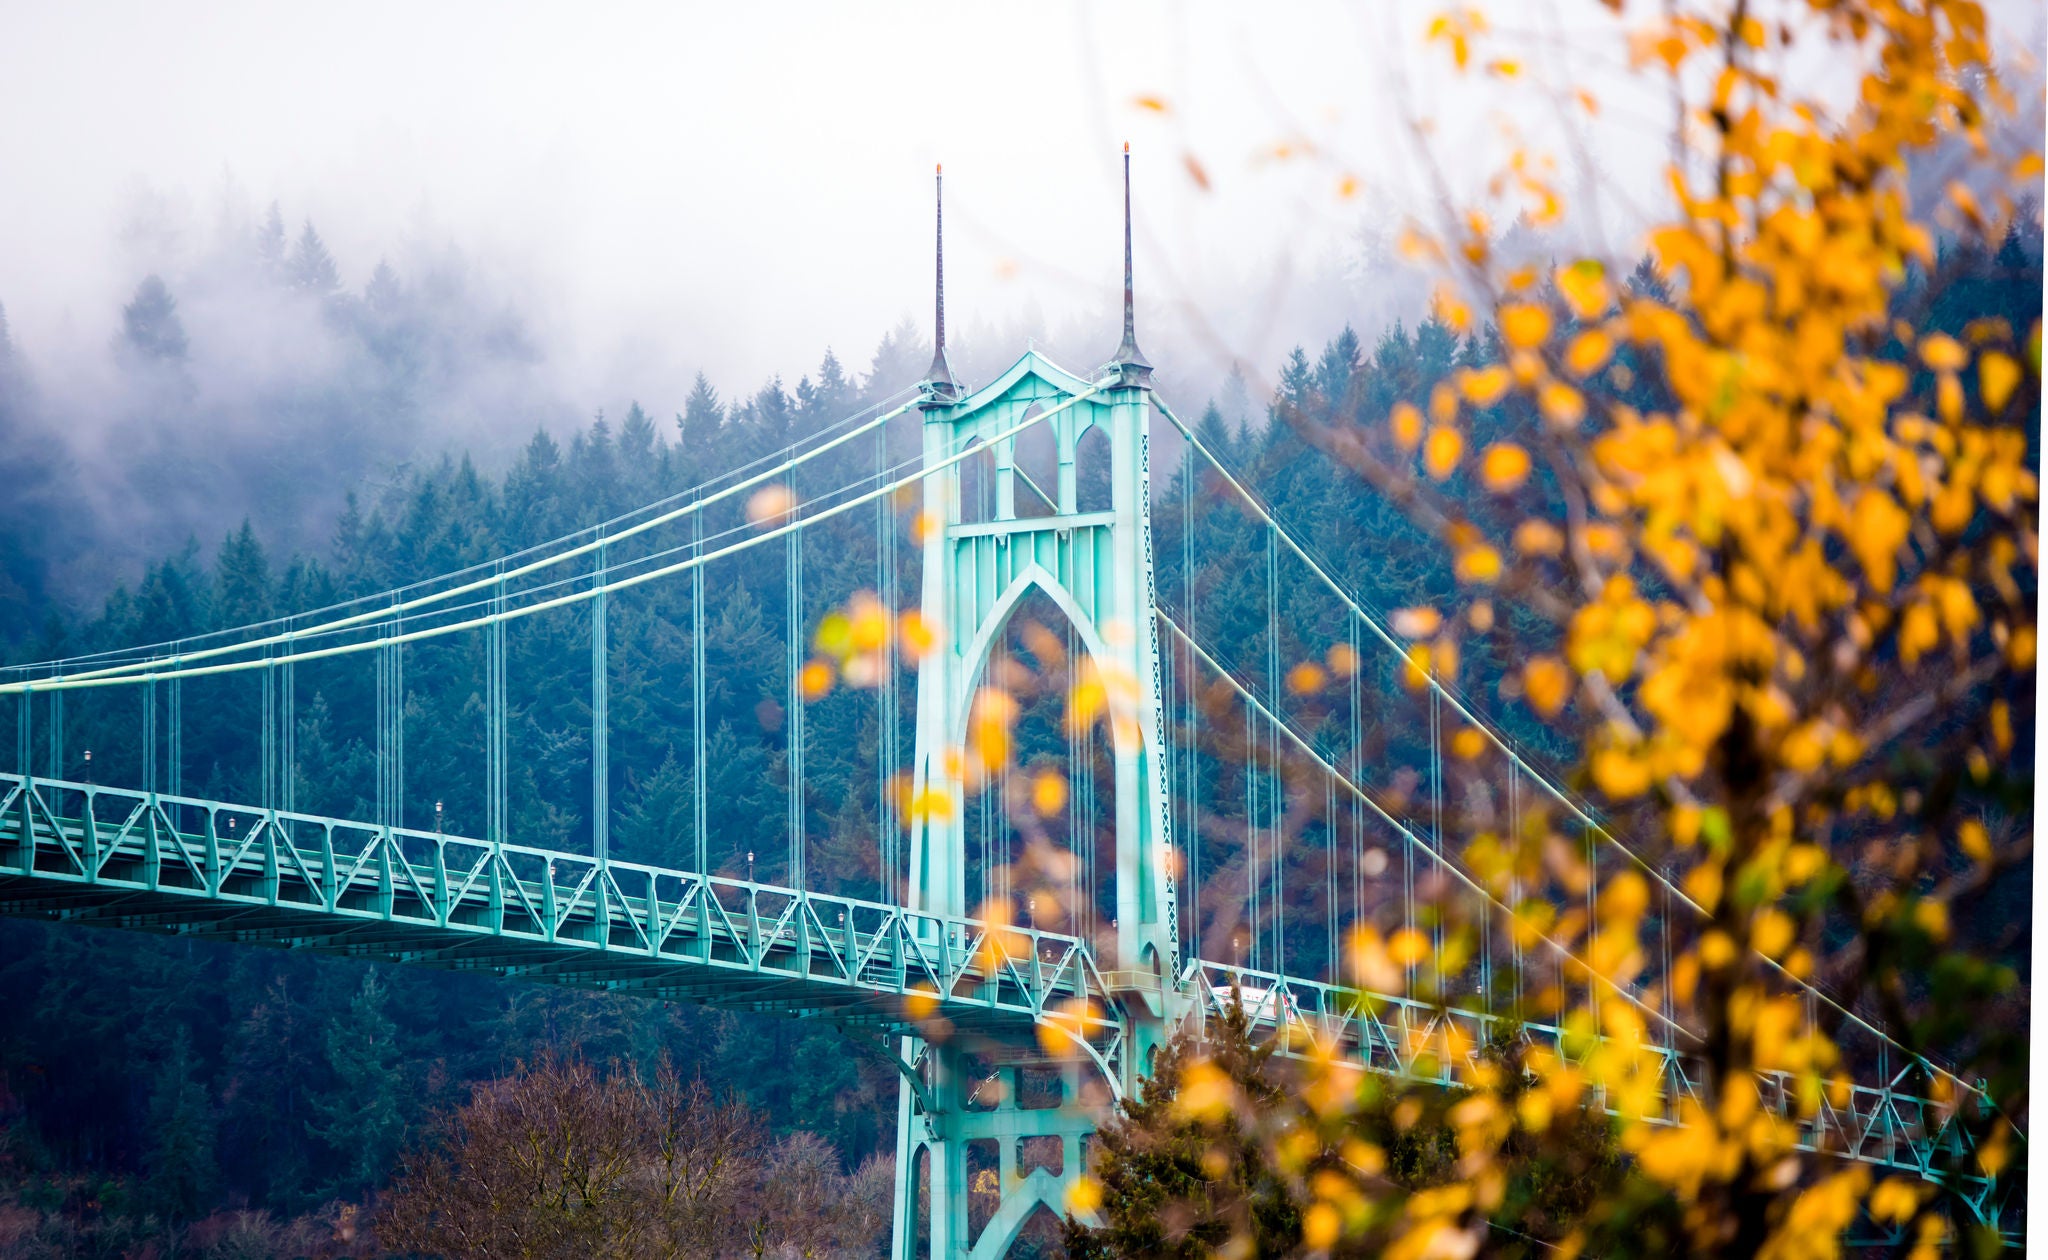 The St. John's bridge emerges from the fog on an autumn day in Portland, Oregon. 